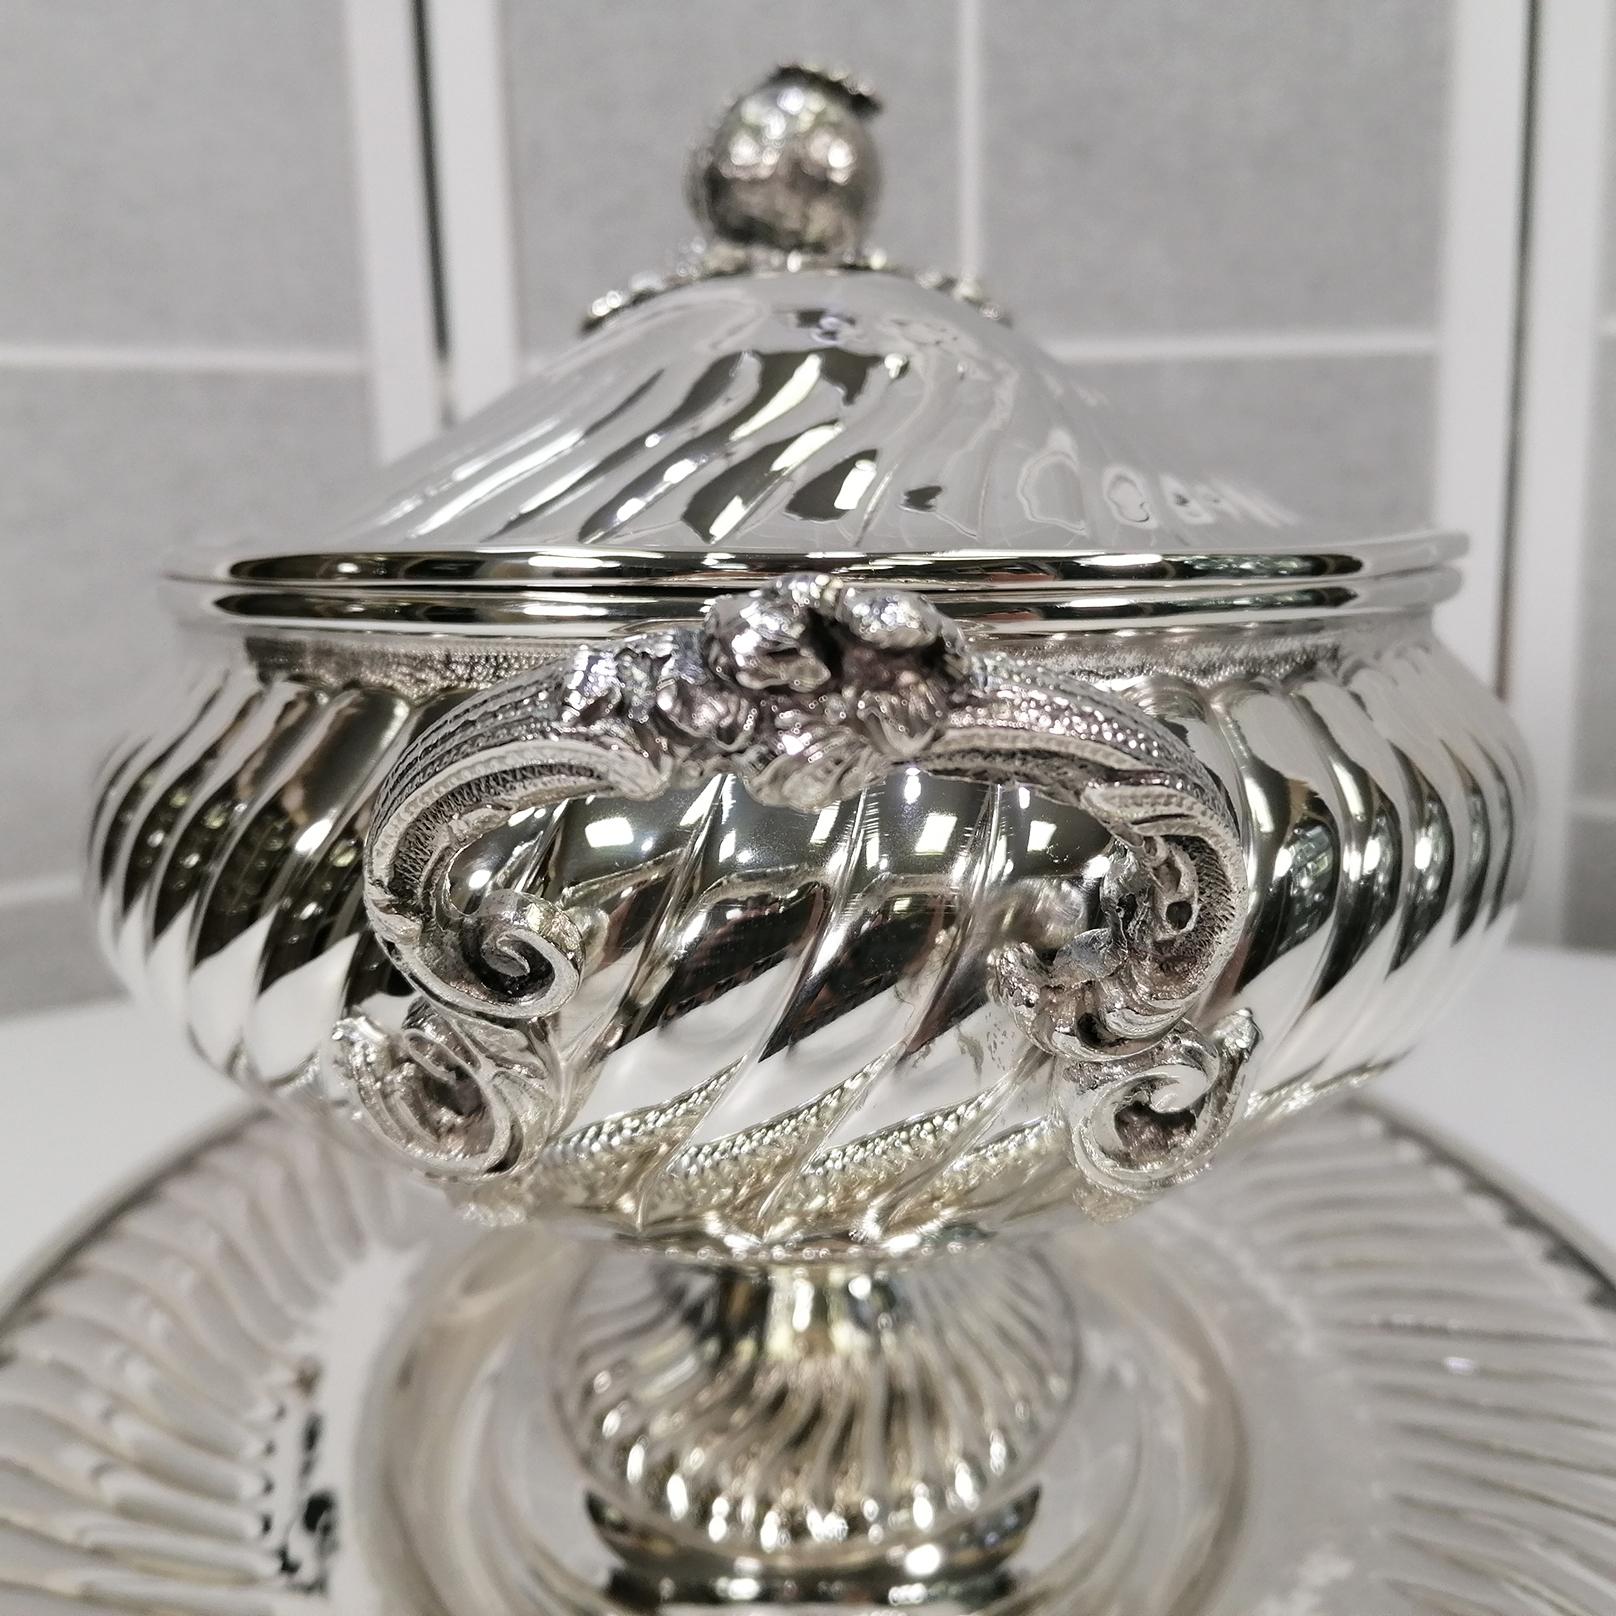 XXI Century Italia Solid Oval Silver Tureen with dish in Baroque style For Sale 2